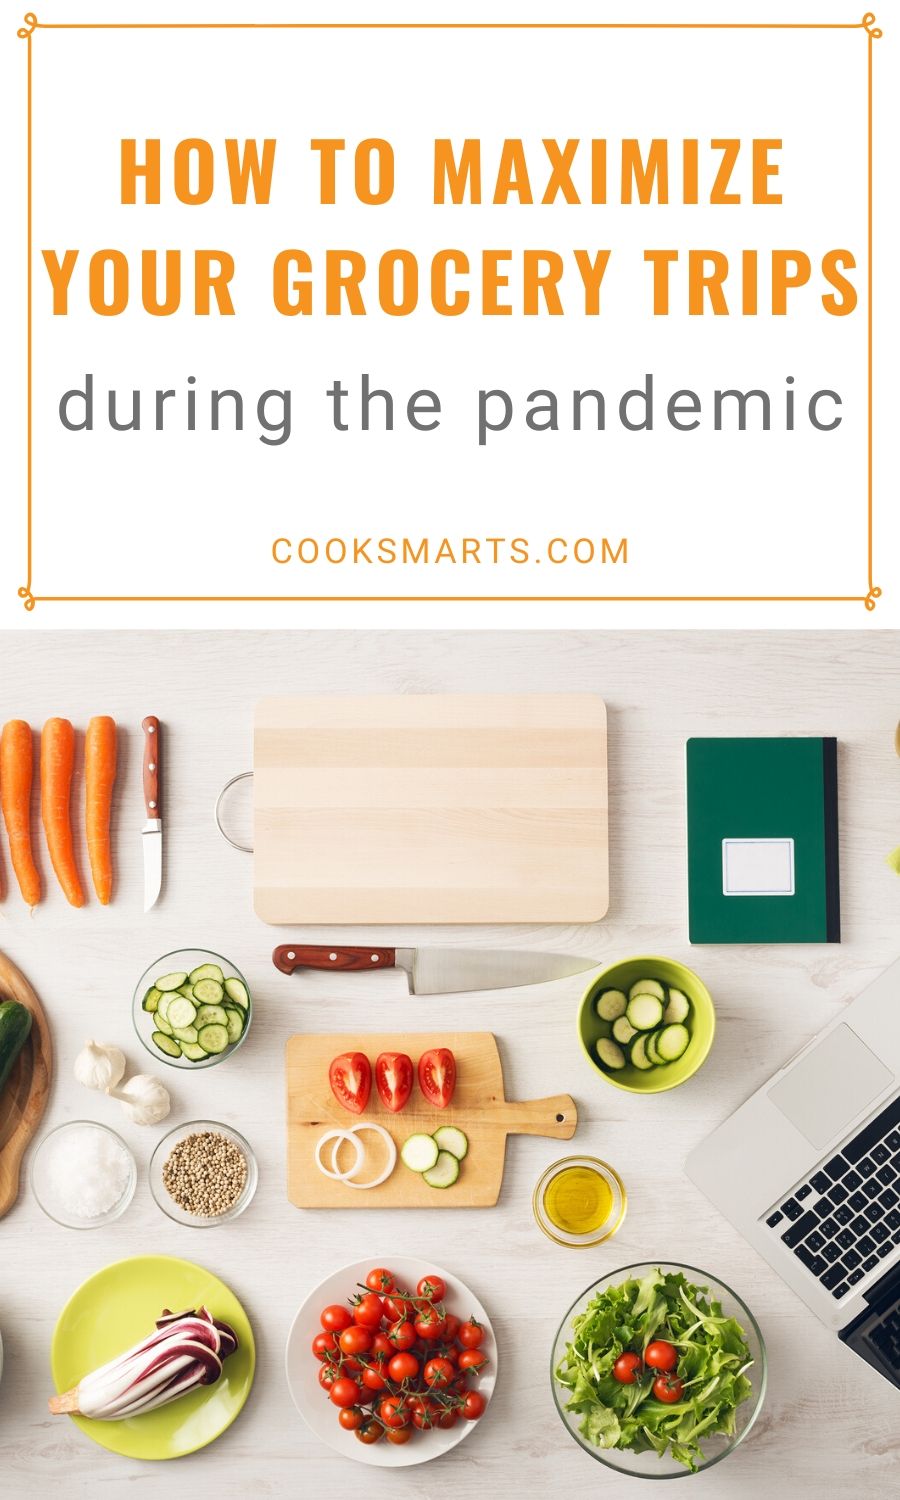 Grocery Shopping Less During Coronavirus with Lauren Davis | In the Kitchen with Cook Smarts Podcast